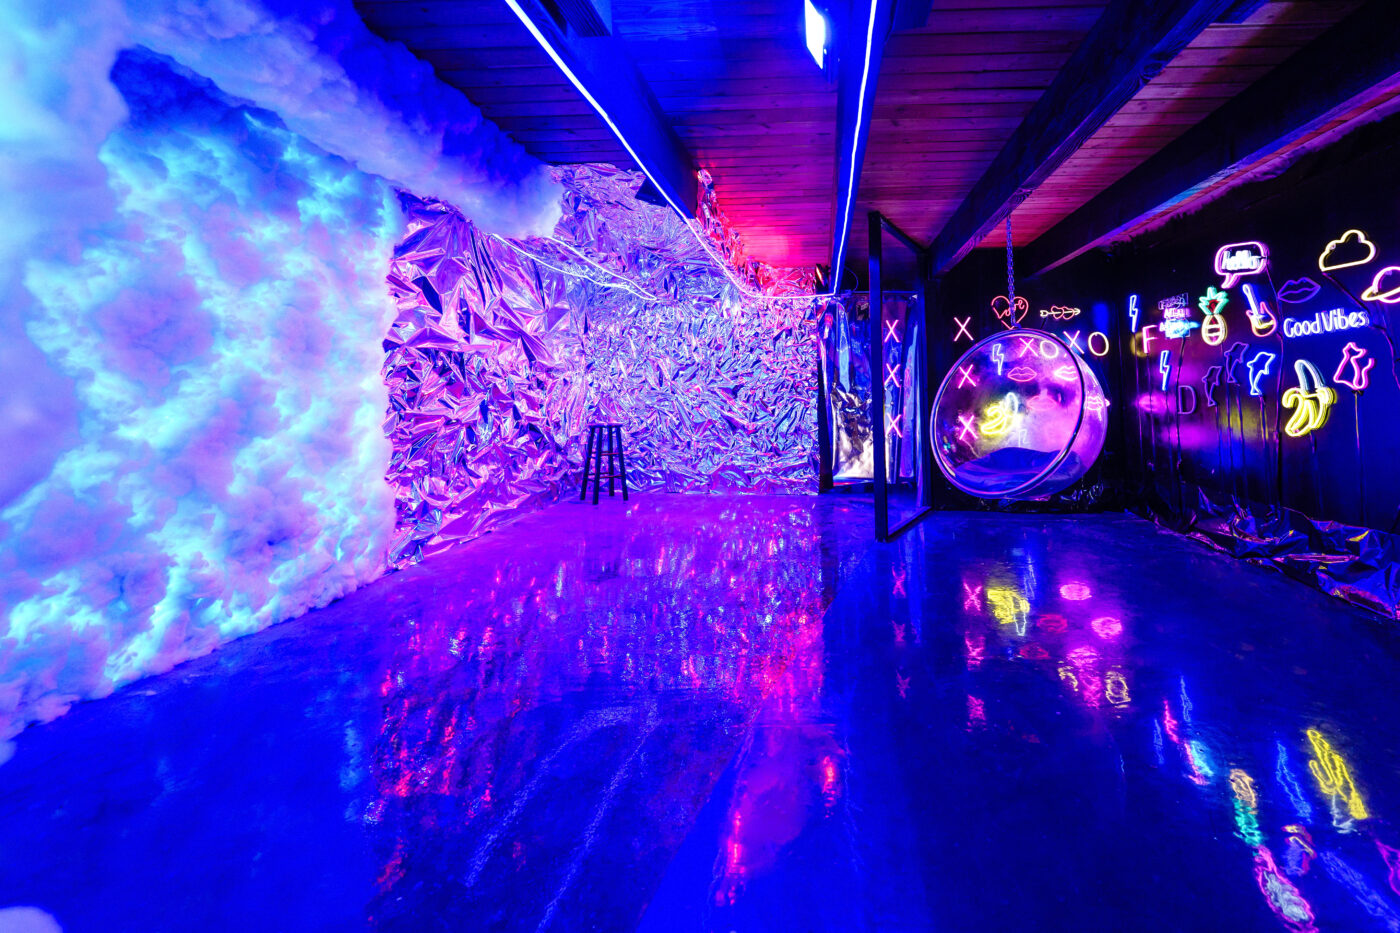 Captivating interior with a futuristic neon-lit corridor, featuring a reflective floor and eclectic neon artwork that creates a vivid and immersive atmosphere.